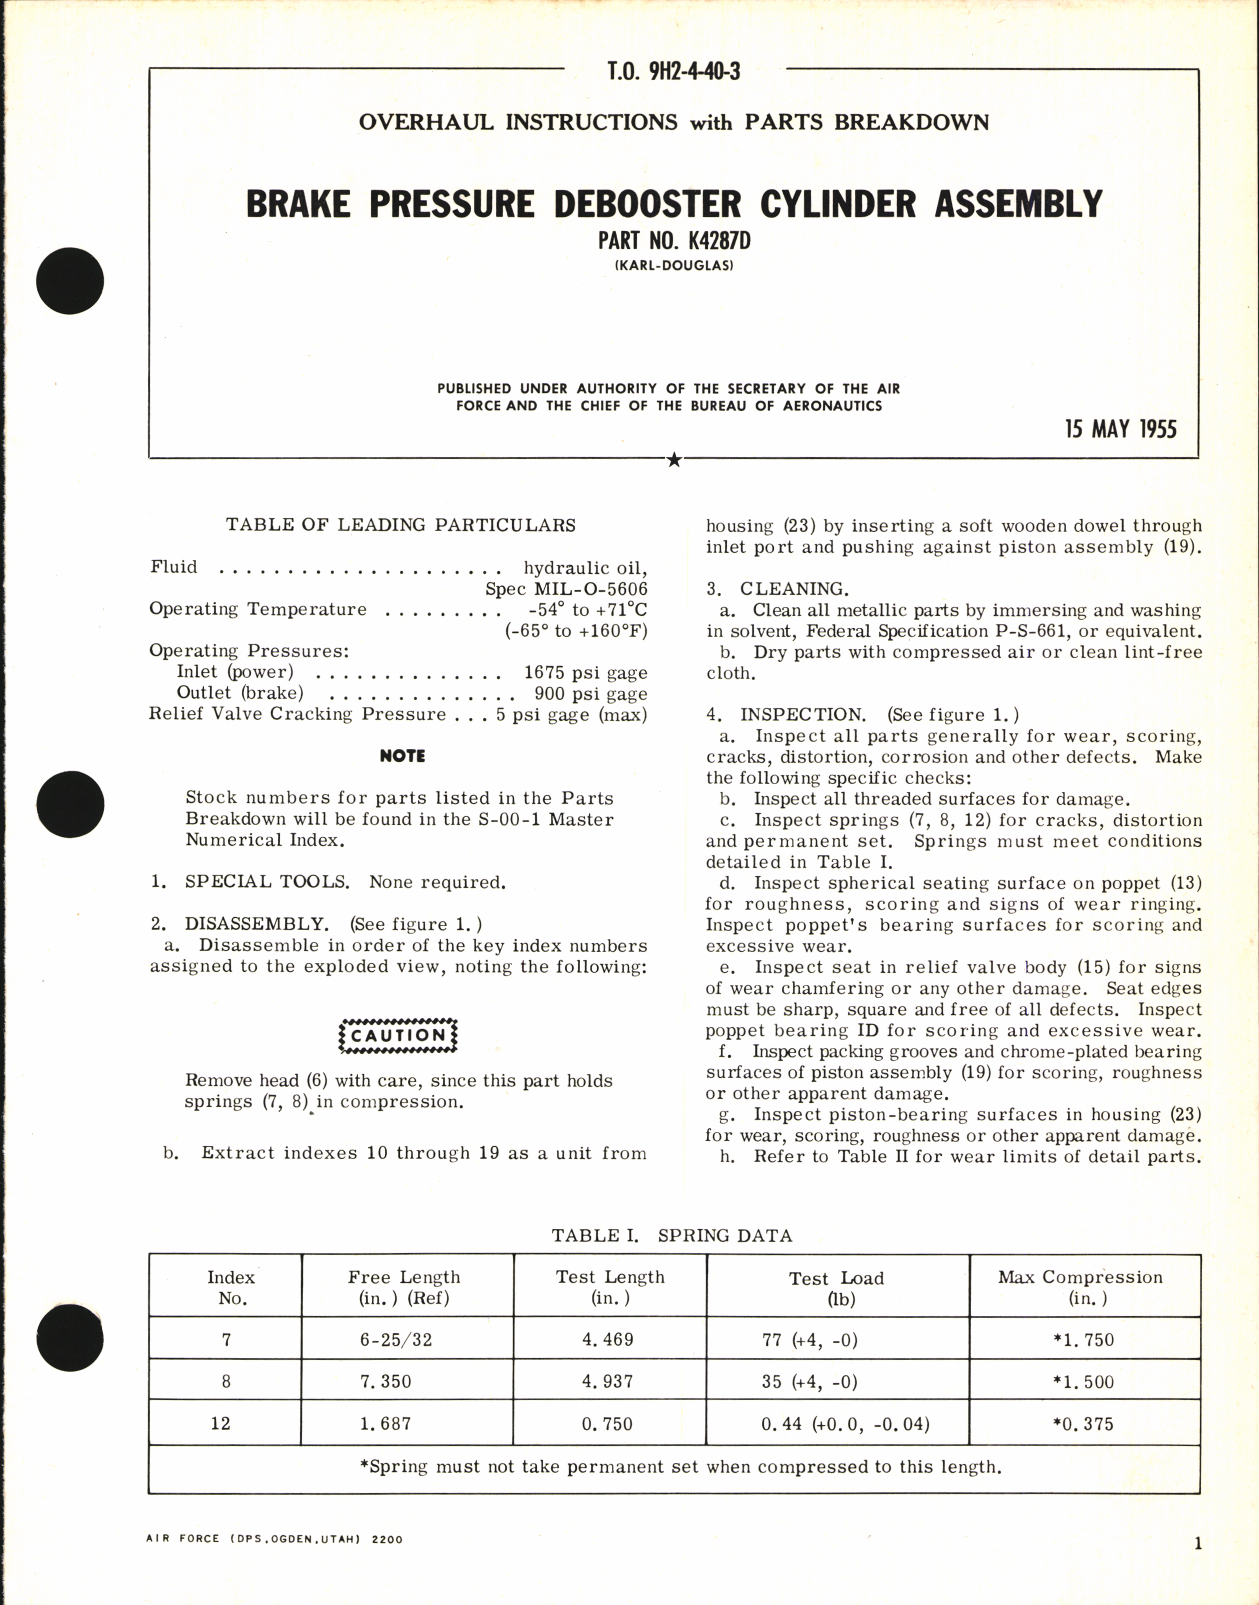 Sample page 1 from AirCorps Library document: Overhaul Instructions with Parts Breakdown for Brake Pressure Debooster Cylinder Assembly Part No. K4287D